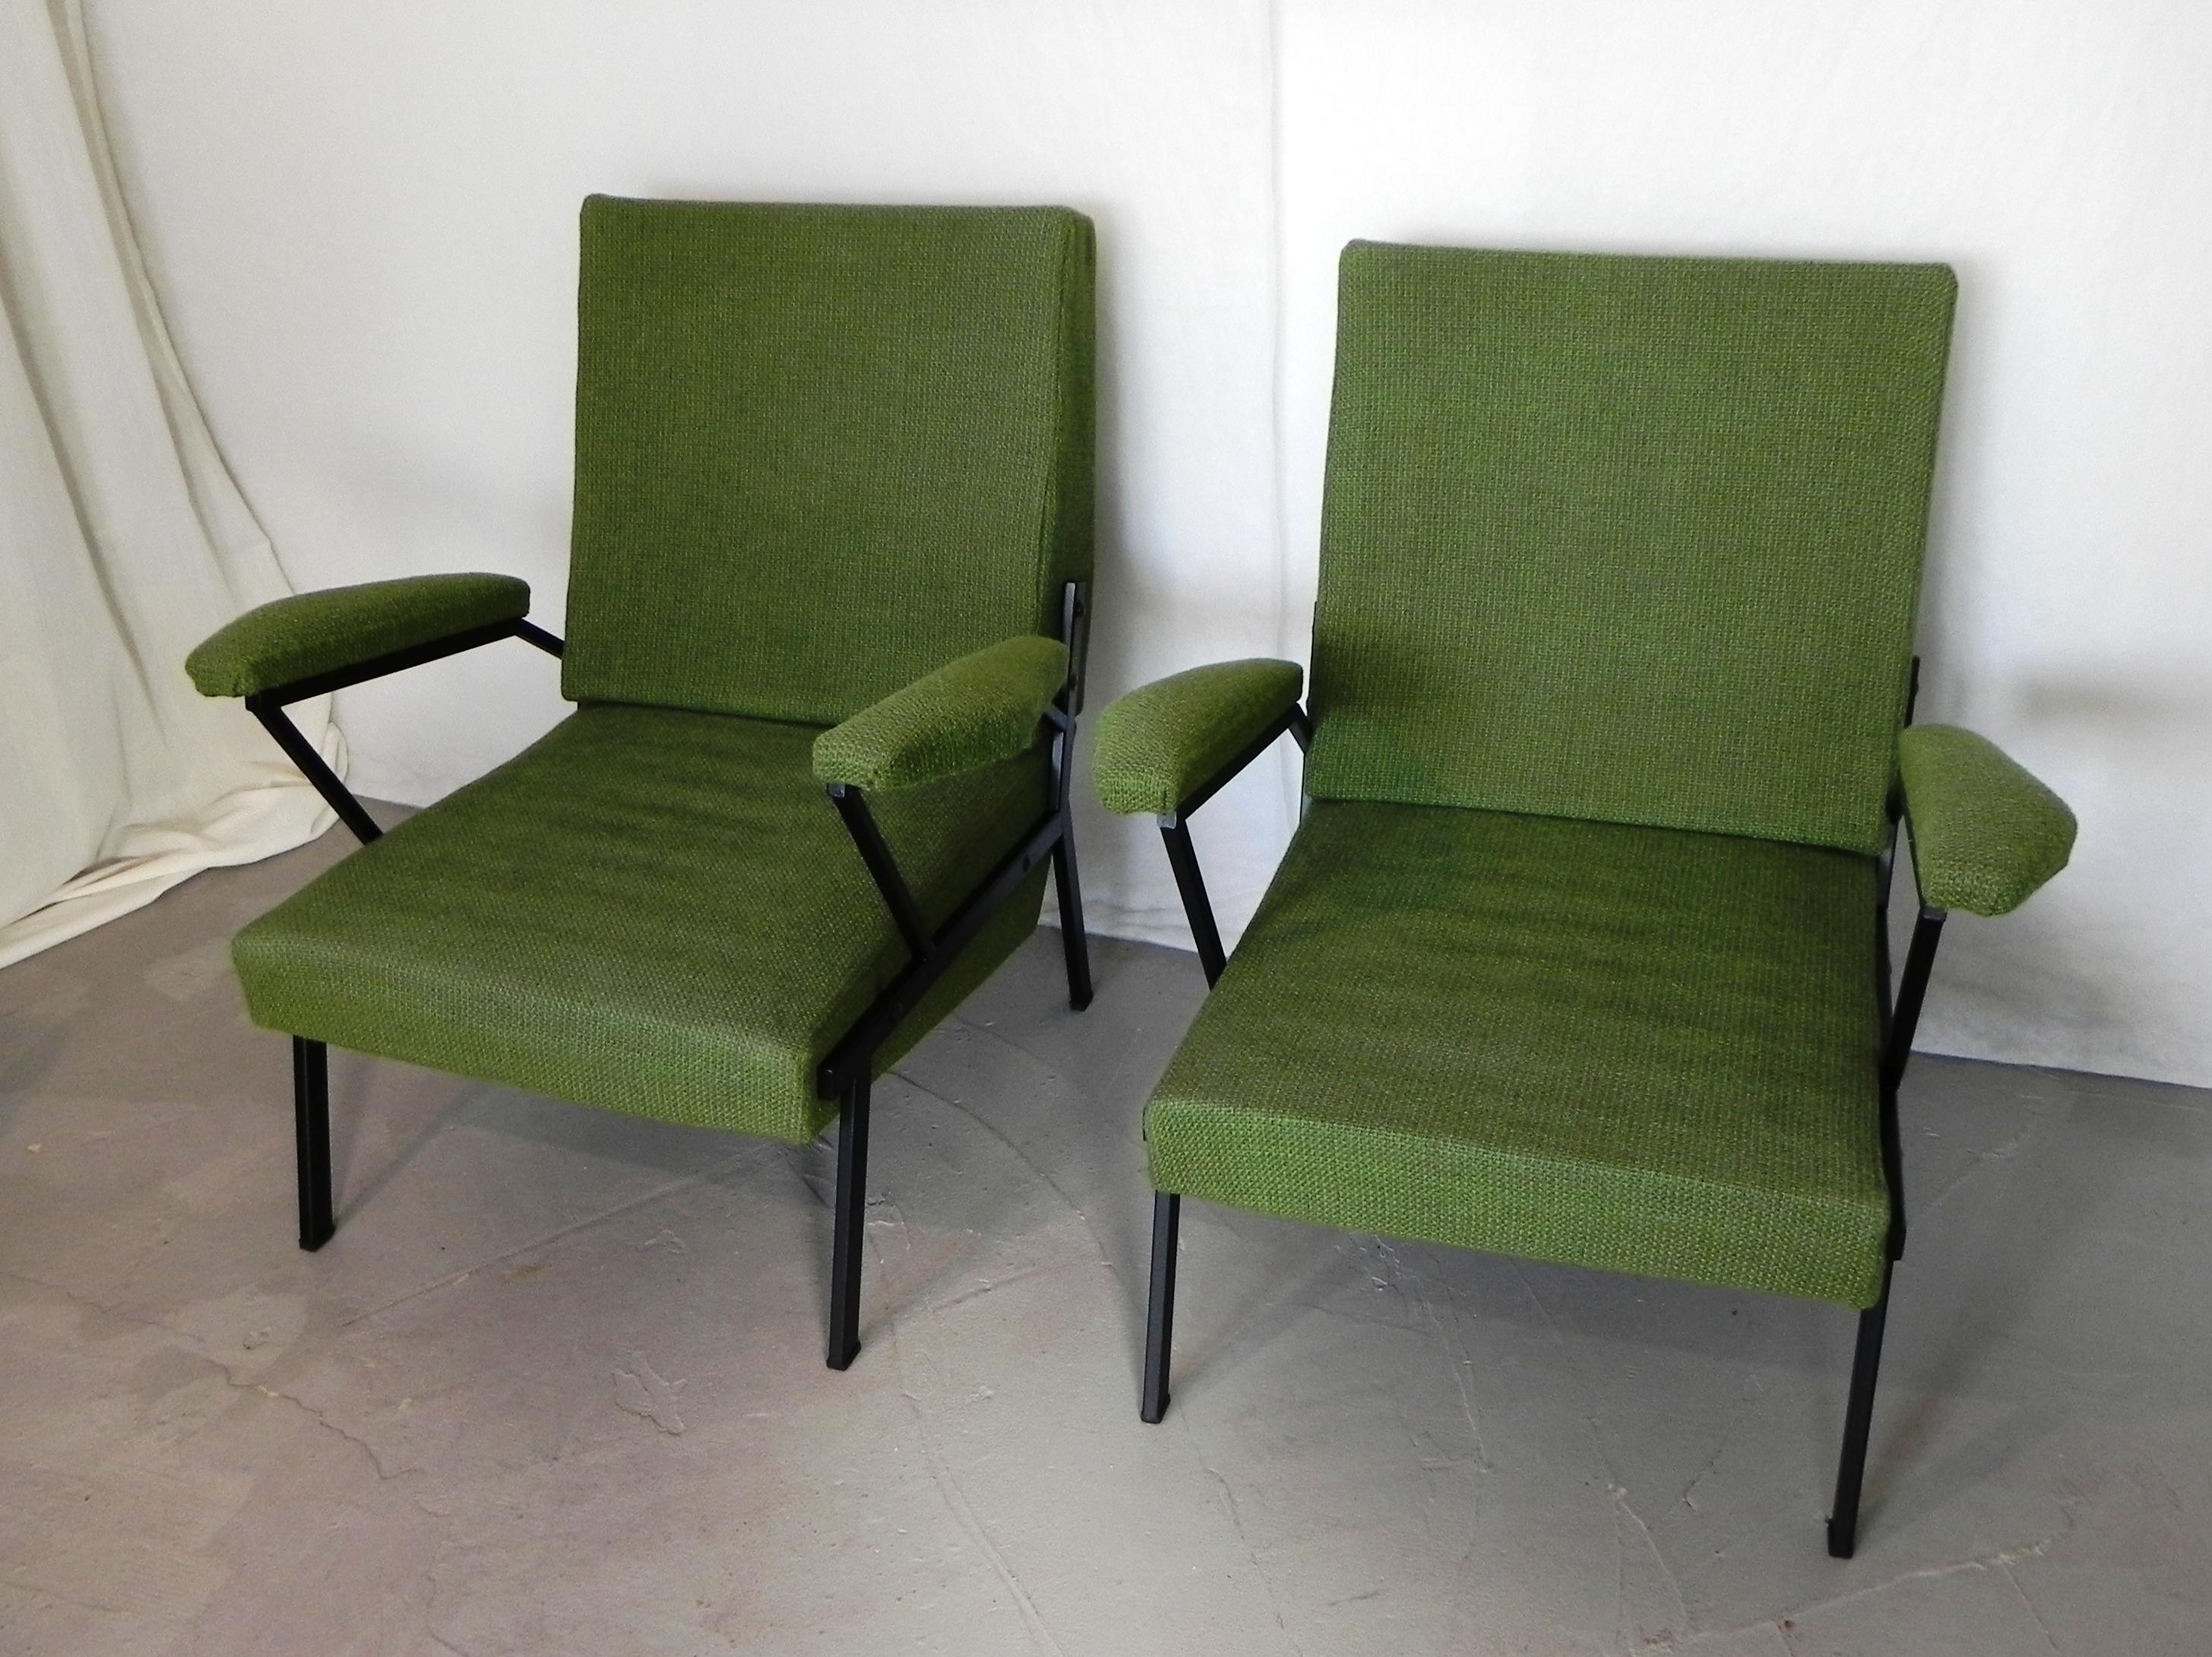 European 2 armchairs from the 1960s